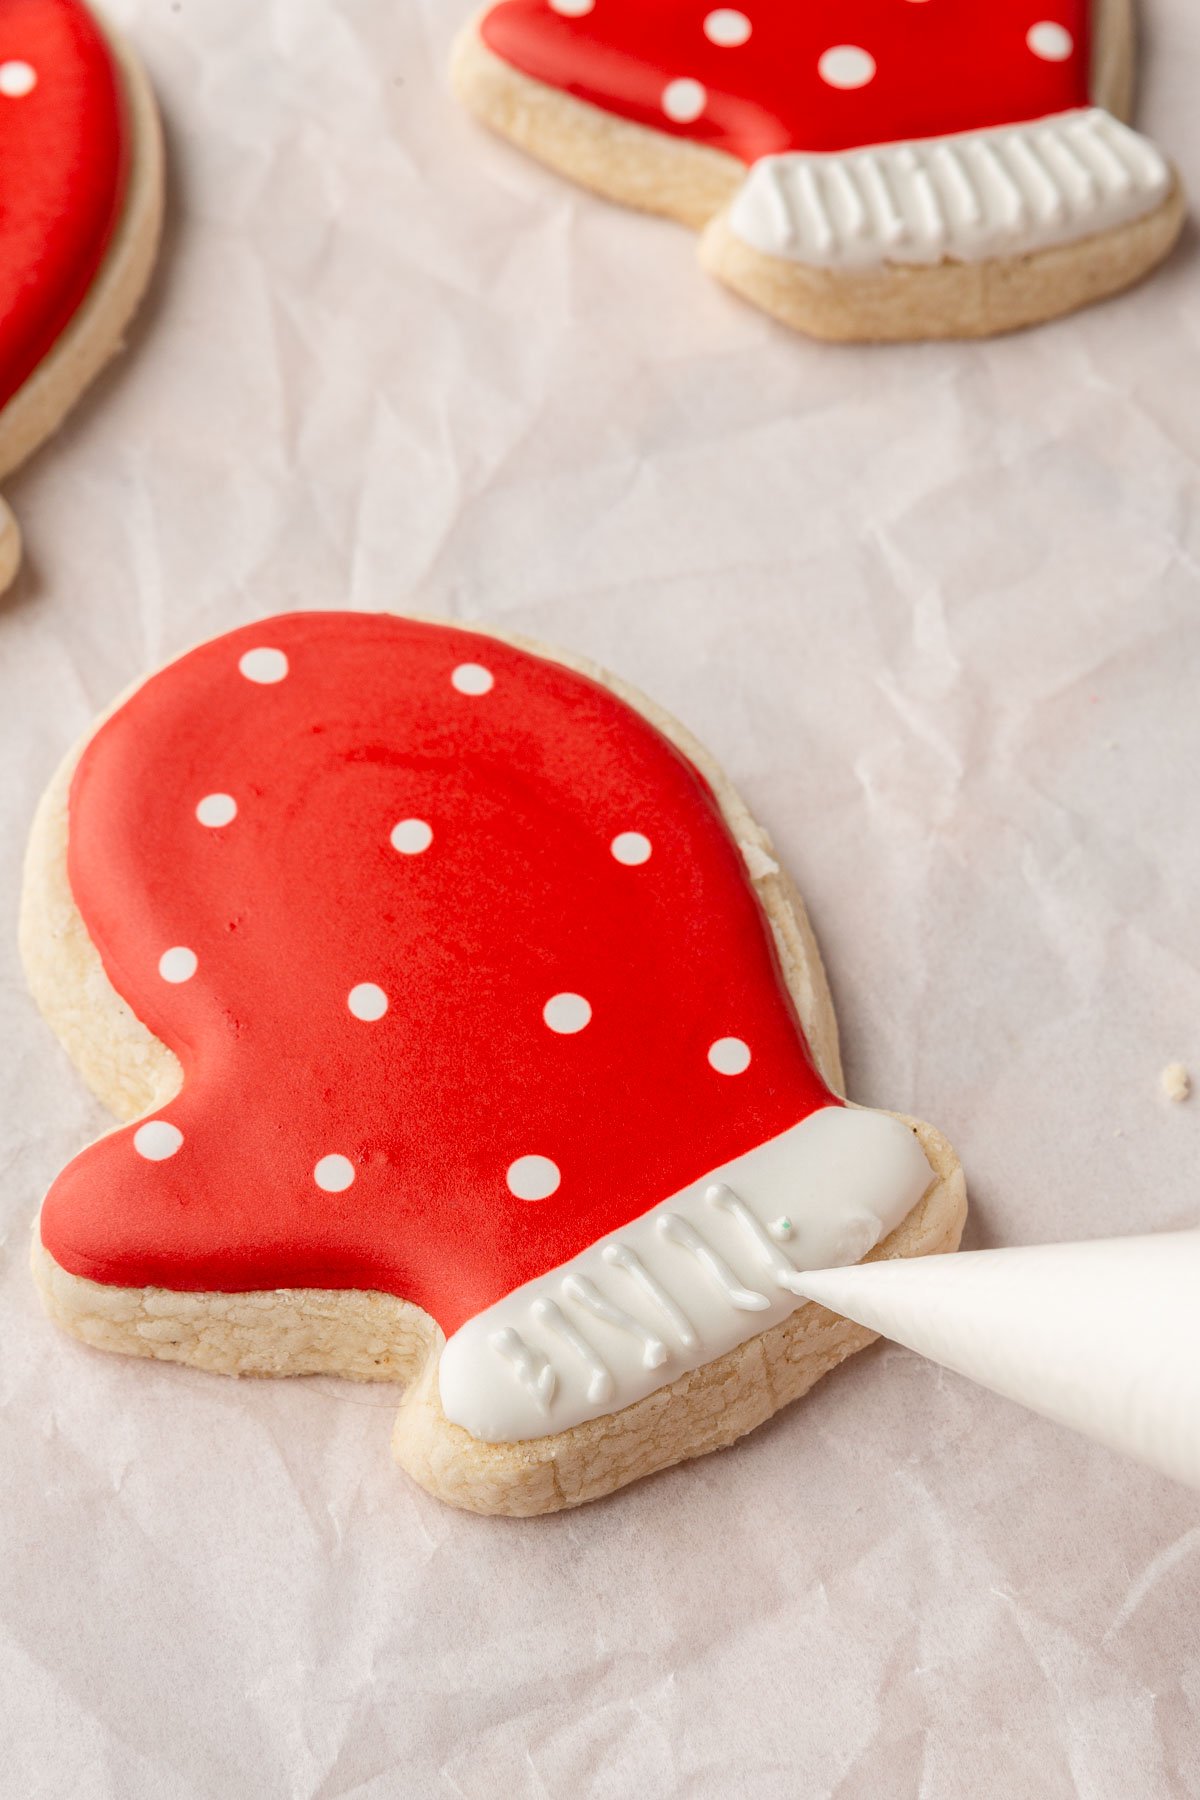 A few gluten free mitten sugar cookies with red icing and white polka dots with a bag of white royal icing making details on the cuff of the mittens.